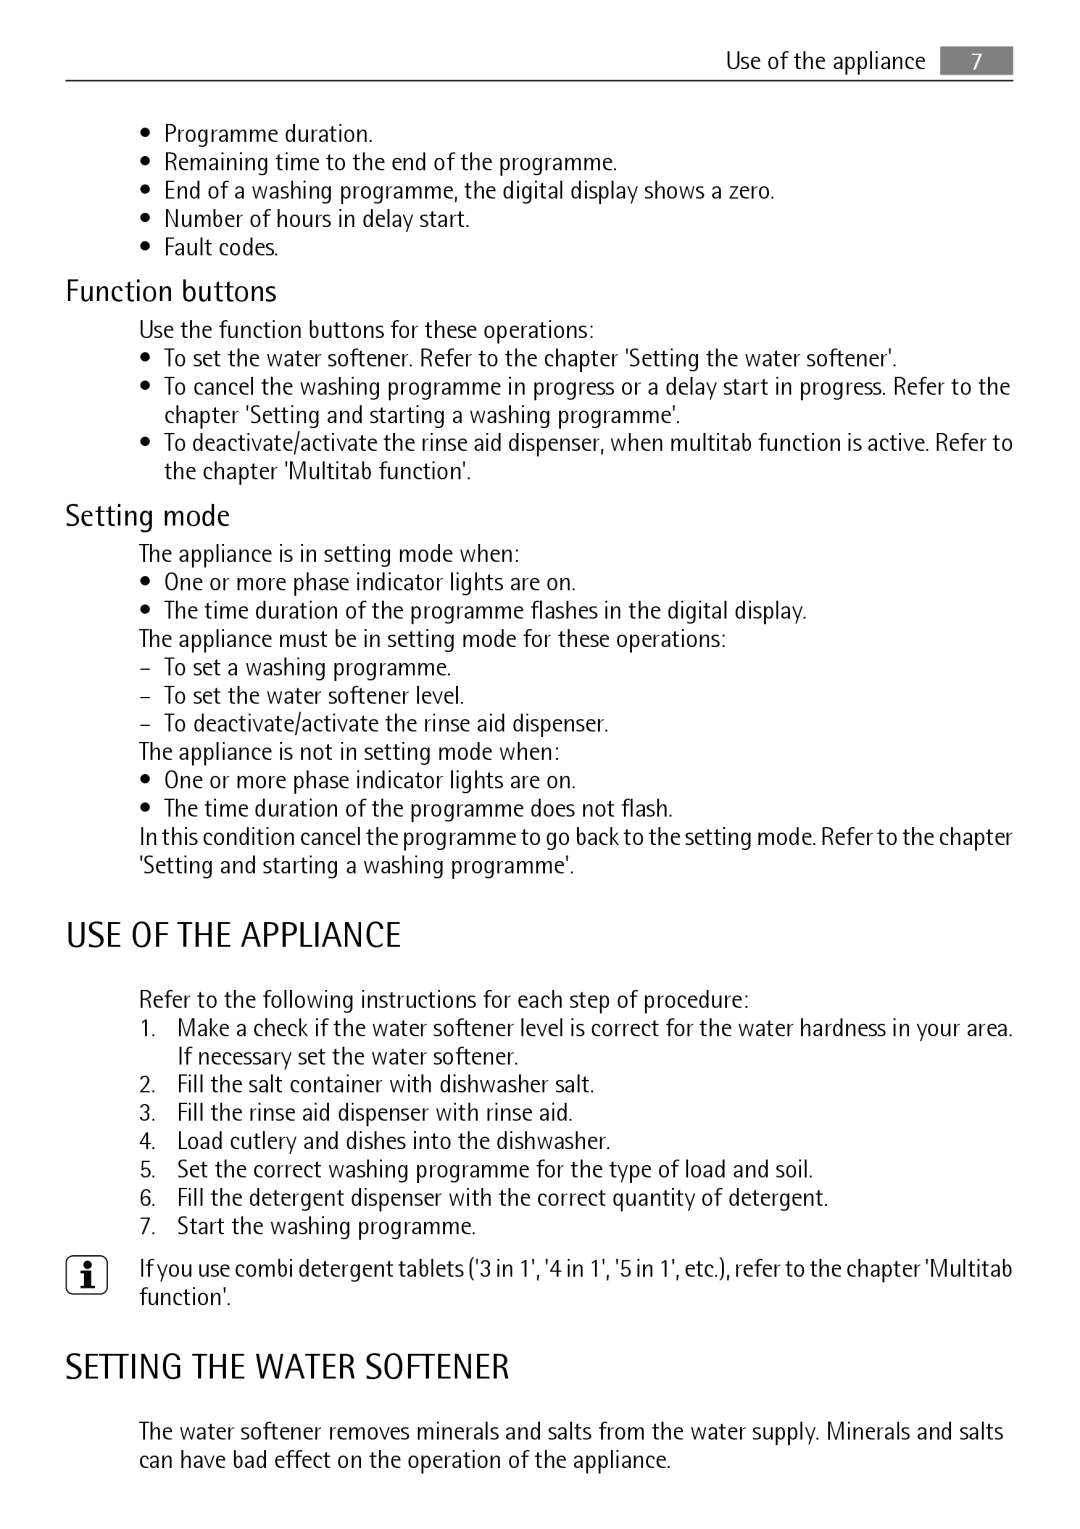 AEG 45003 user manual Use Of The Appliance, Setting The Water Softener, Function buttons, Setting mode 